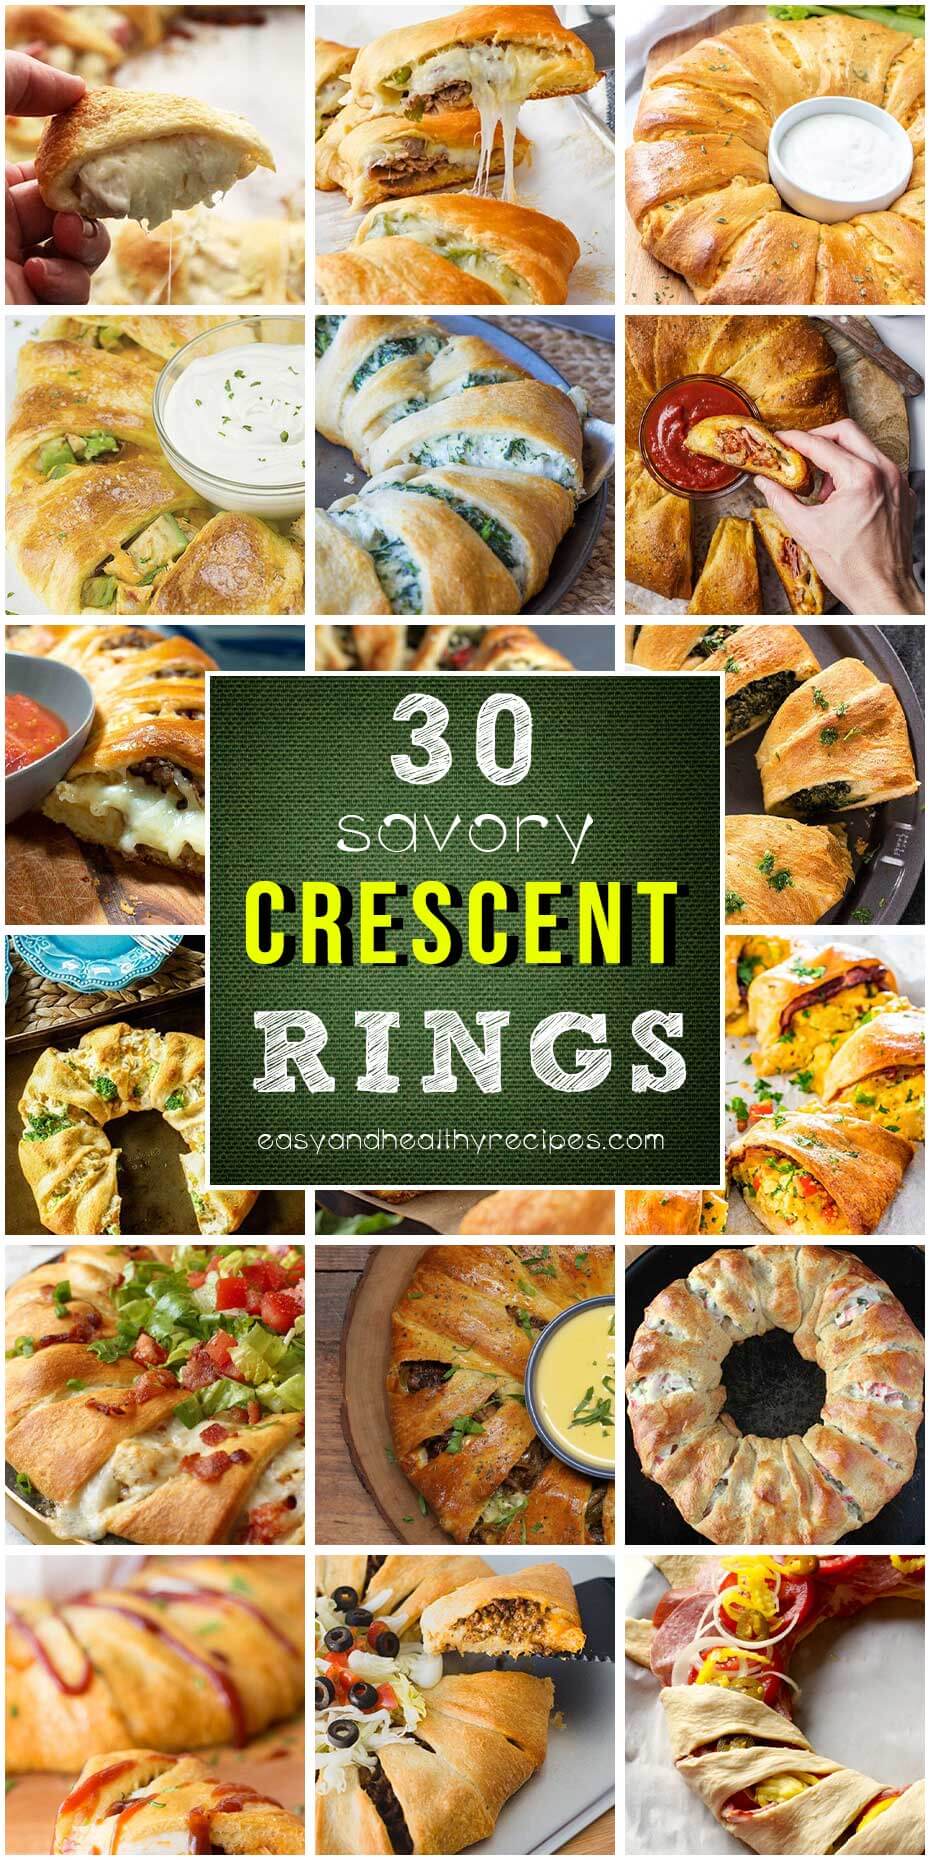 30 Savory Crescent Rings You Should Try